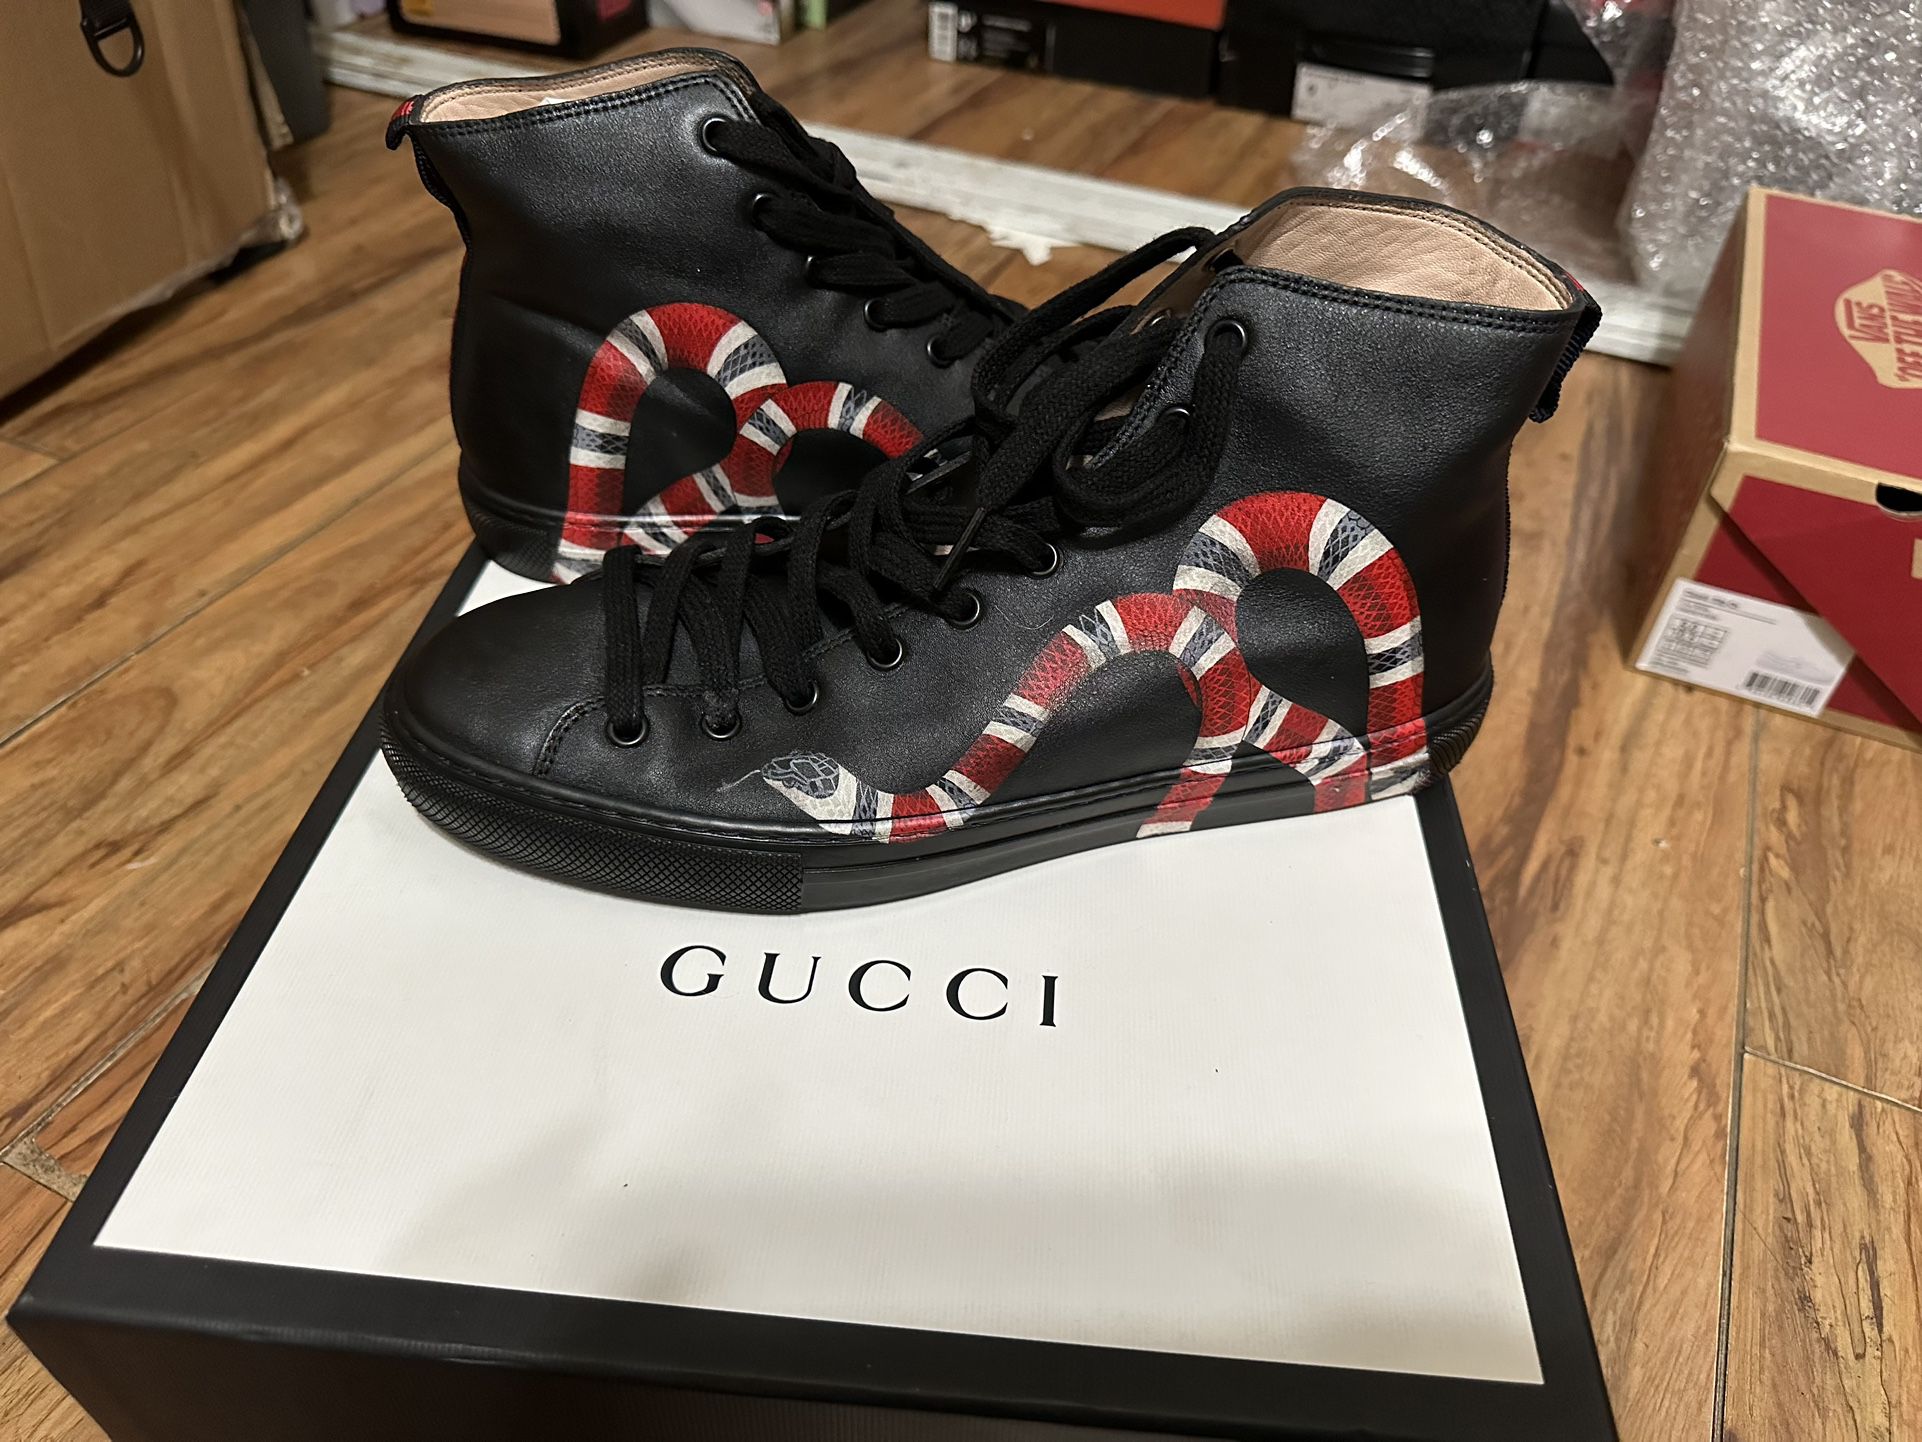 Men's Gucci Sneakers Snakeskin Limited Edition, Gucci Size = US Size 7.5 - $800 OBO for Sale in Anaheim, CA - OfferUp